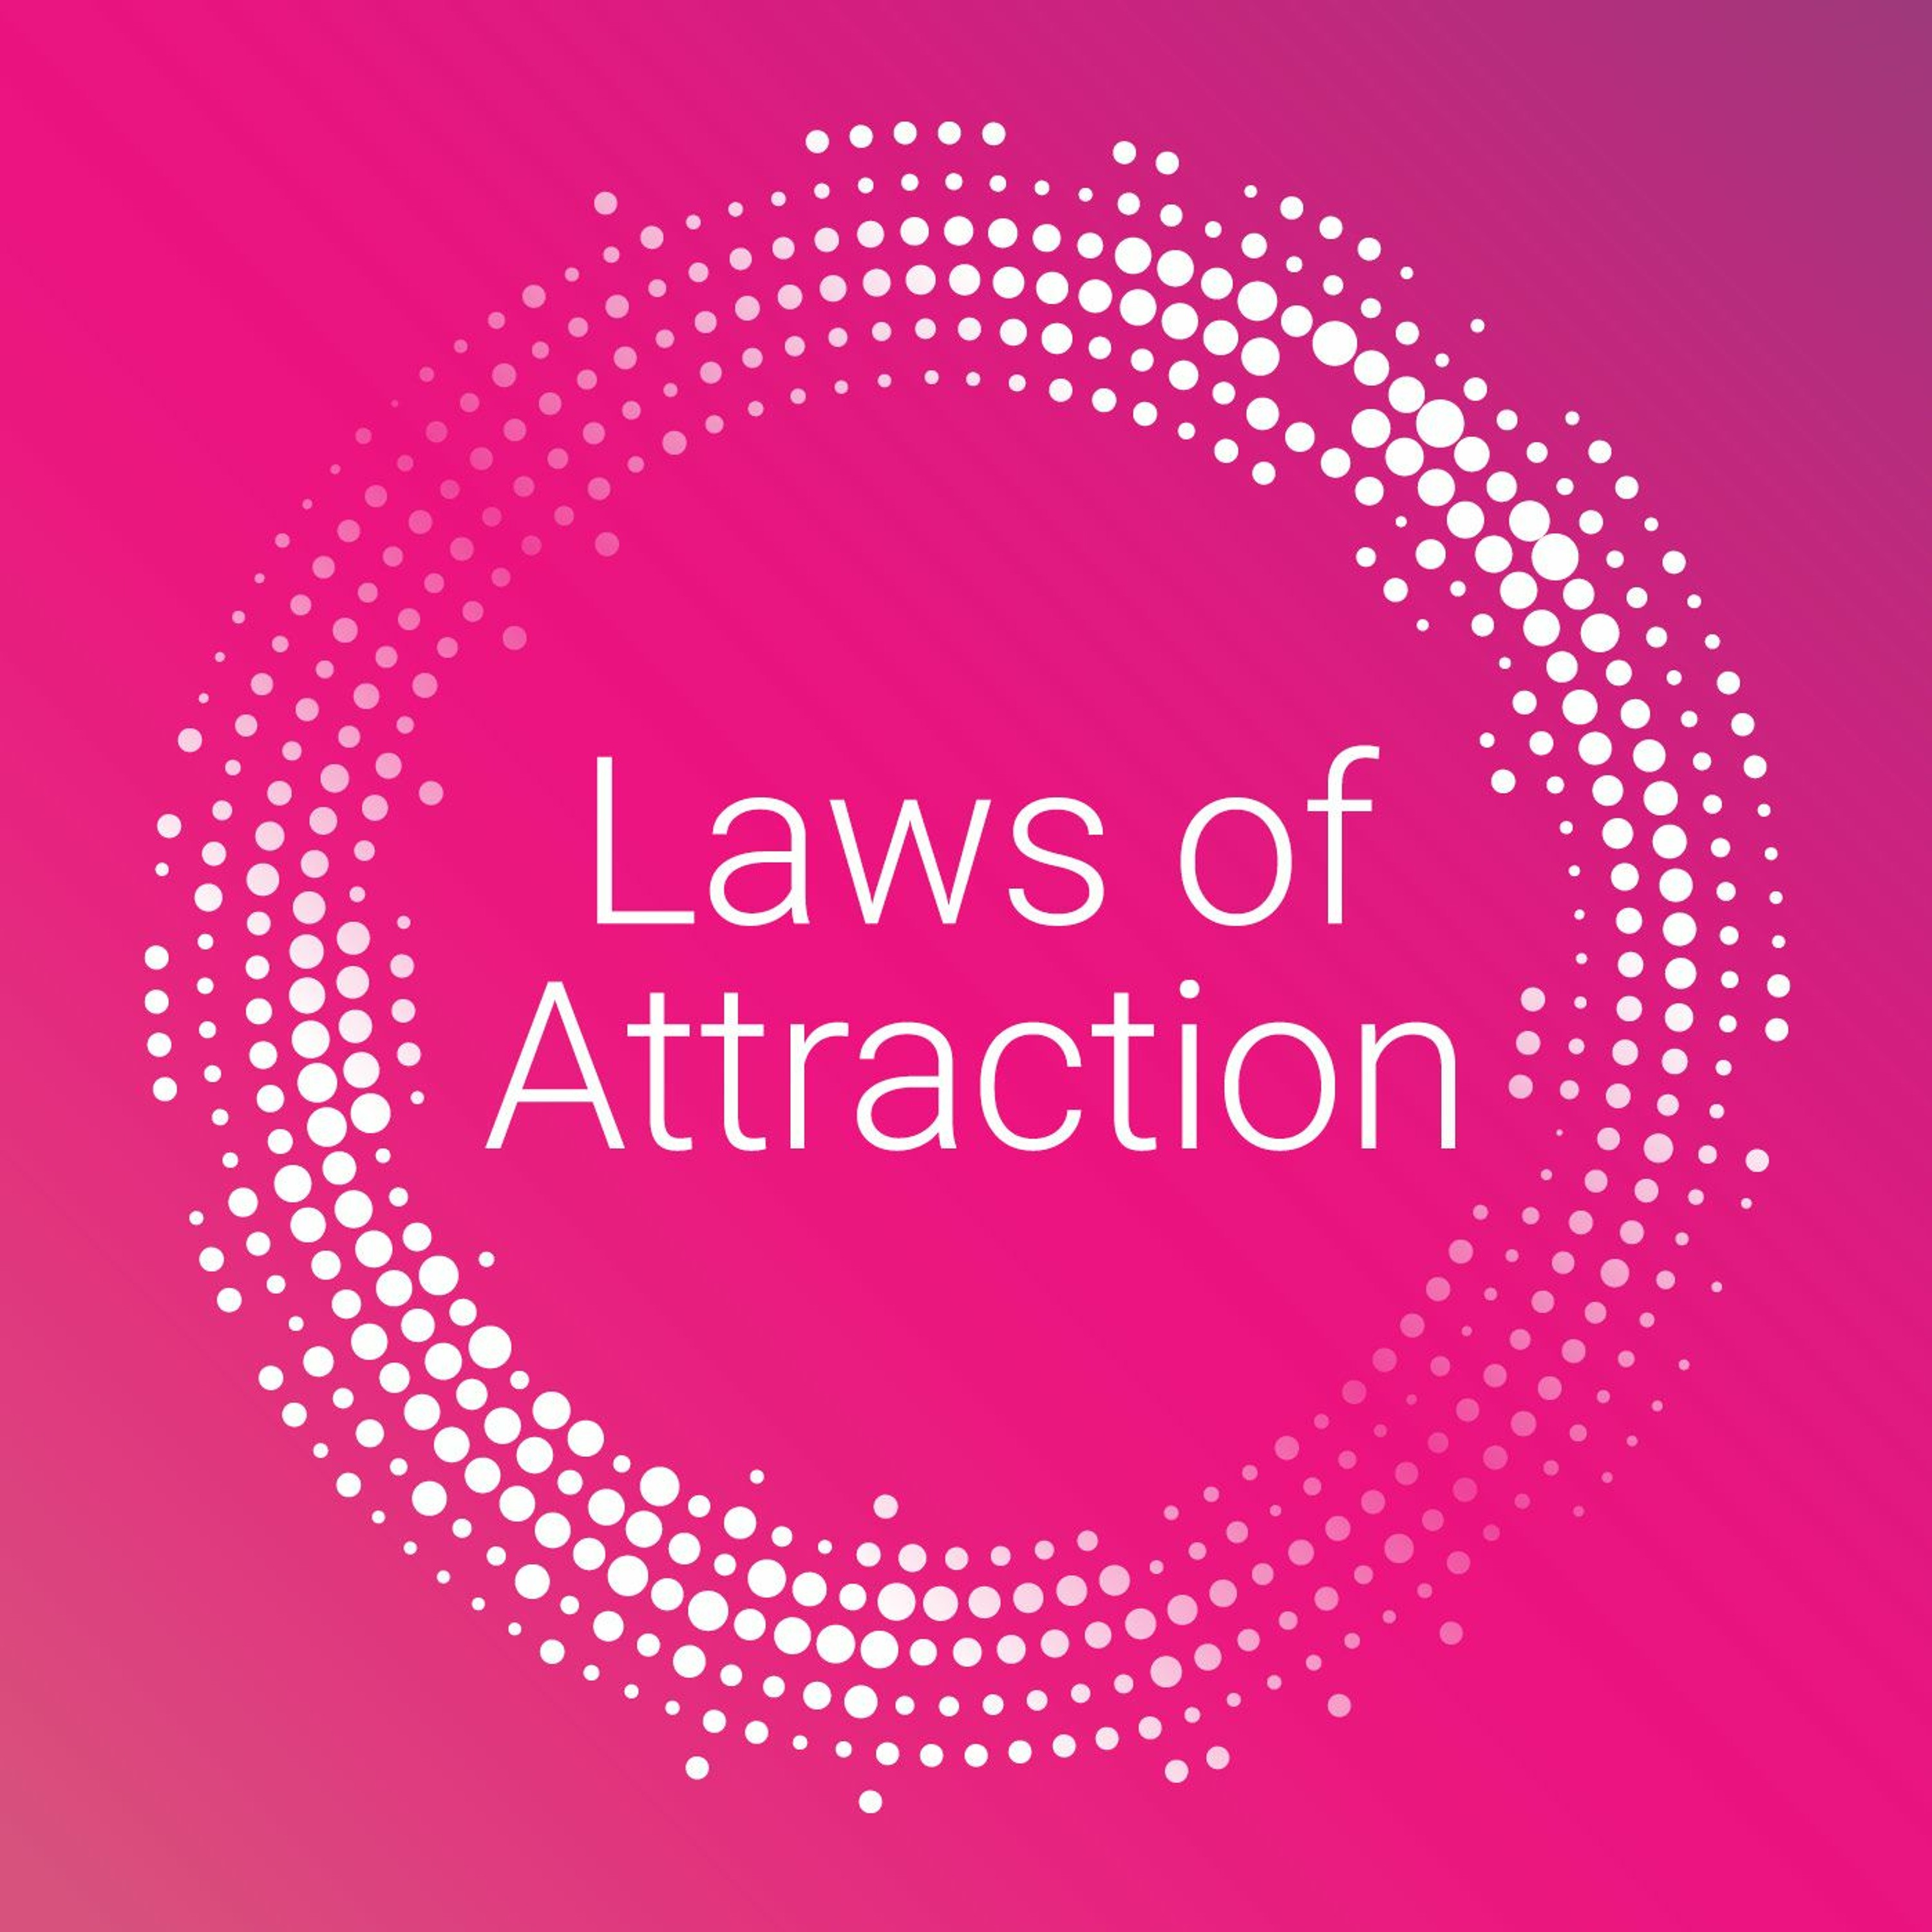 Laws of Attraction - What is workplace diversity?